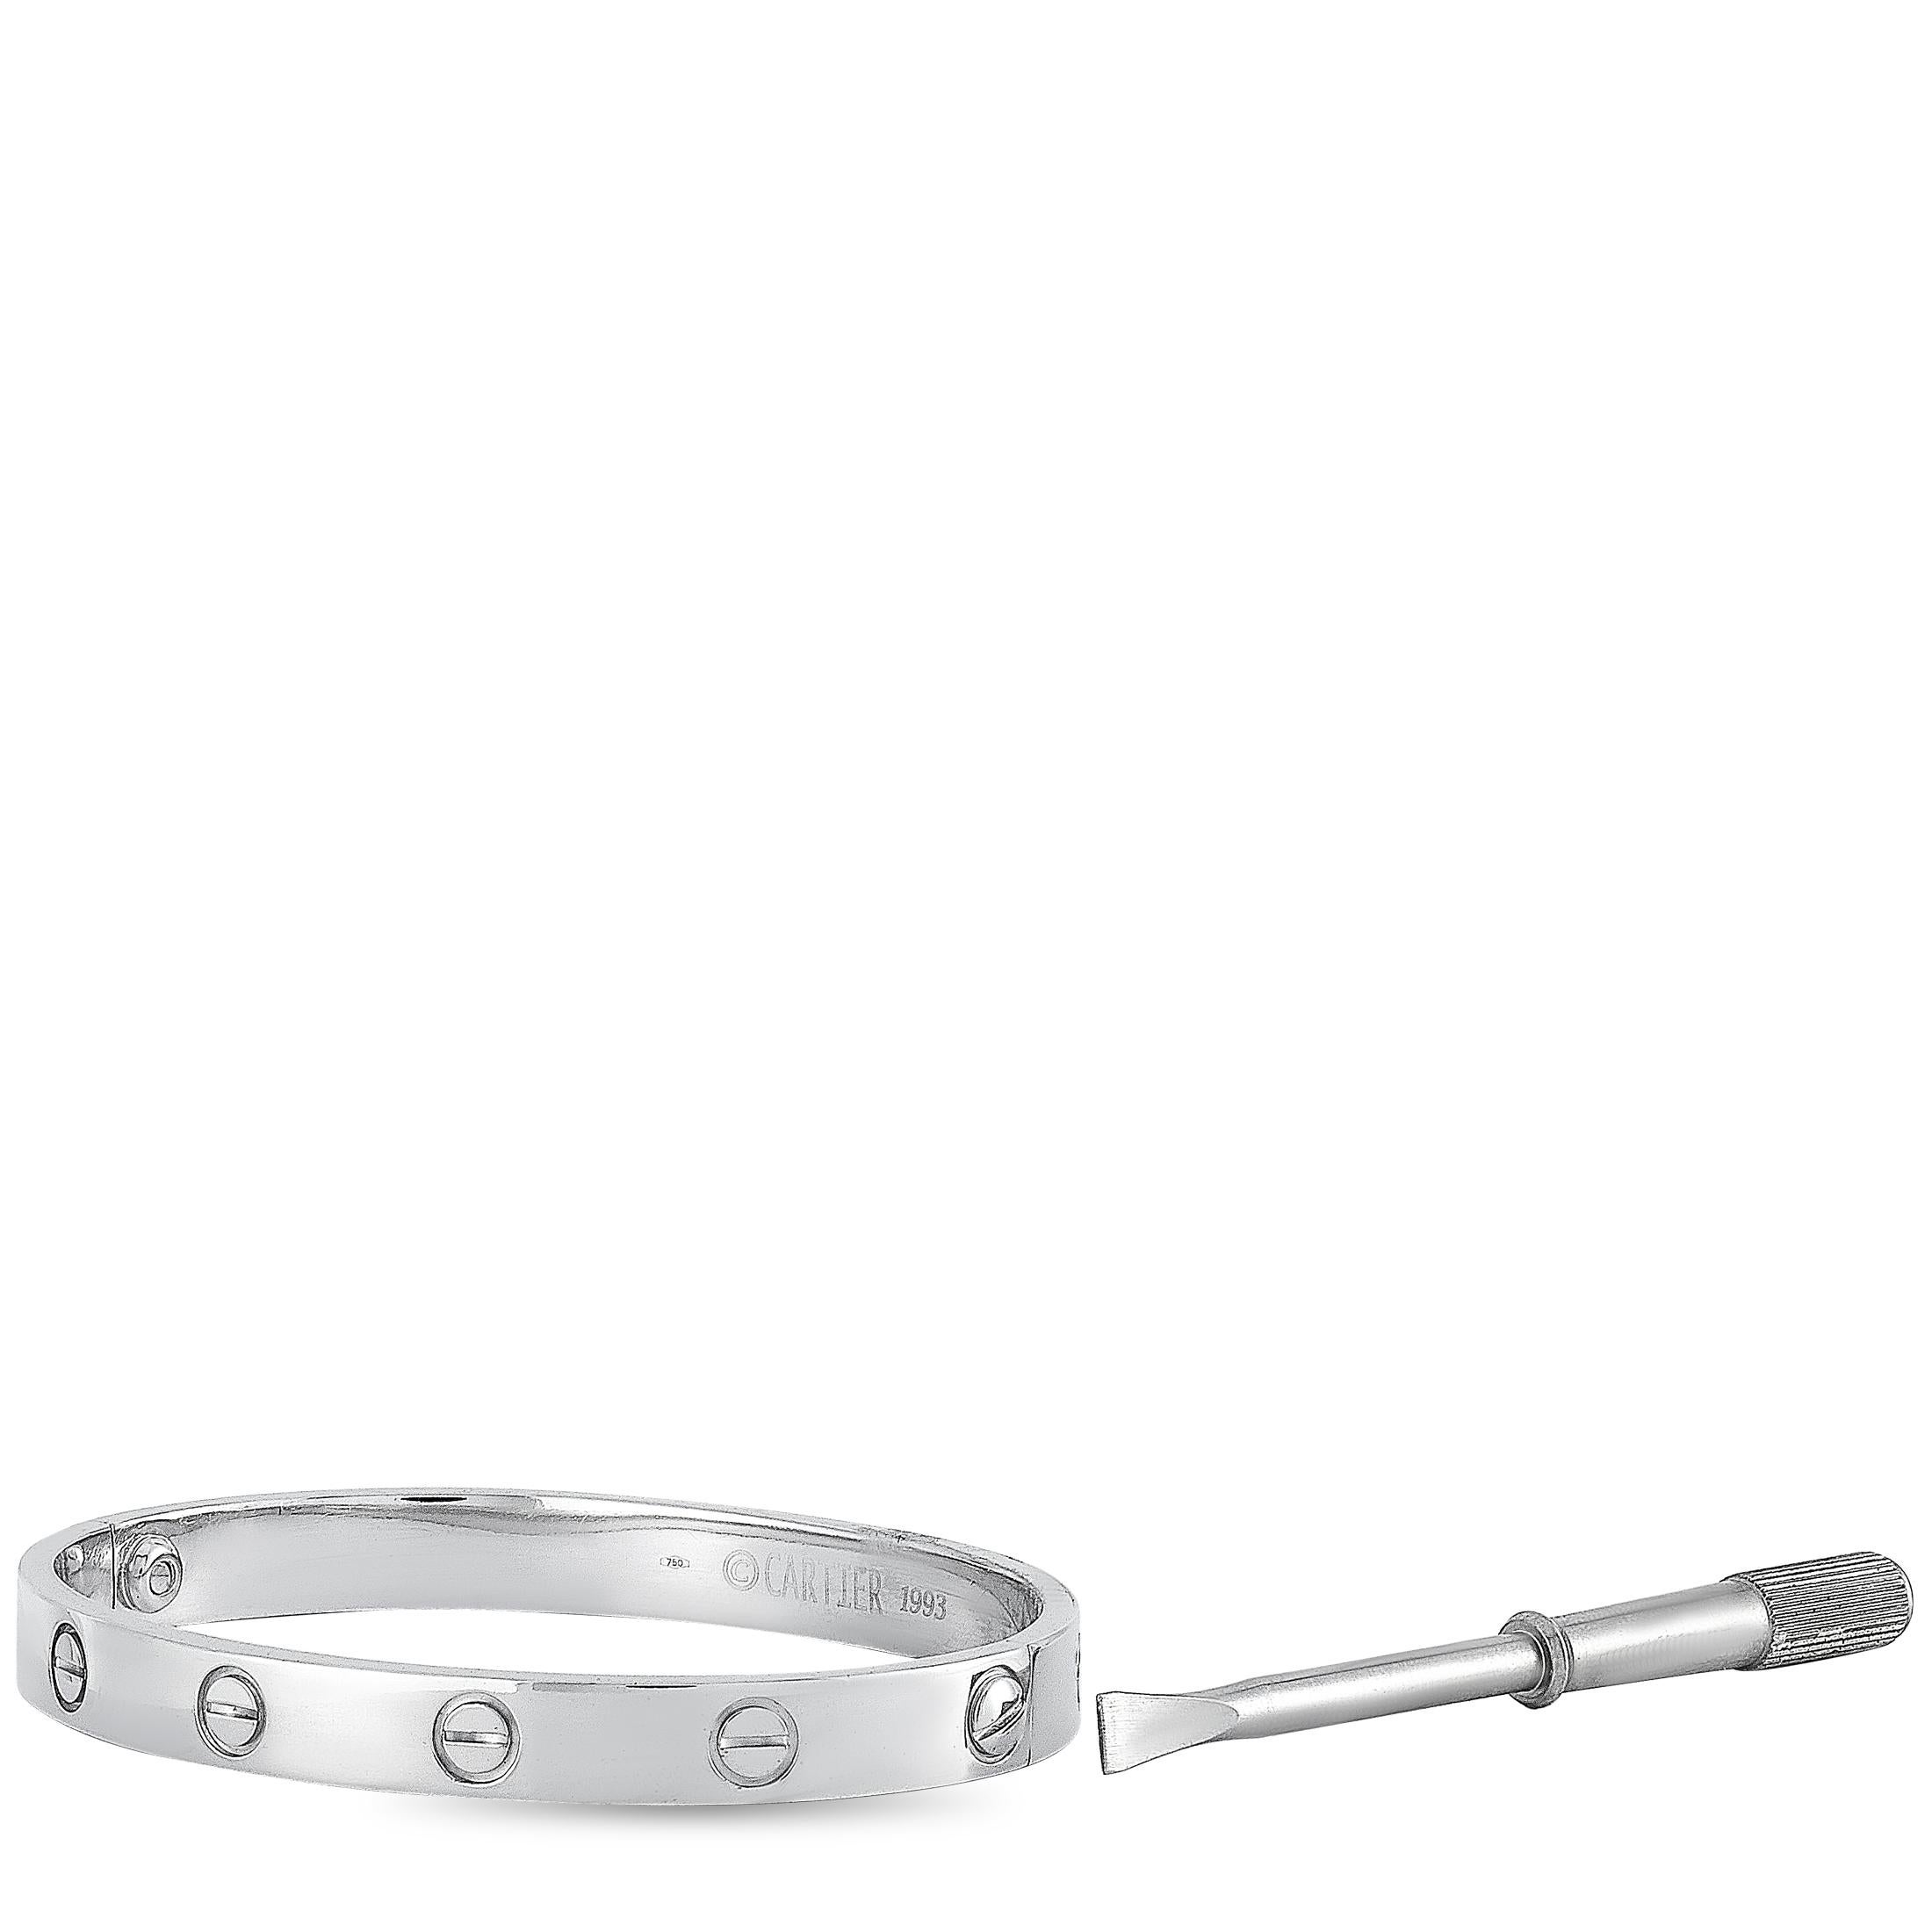 The Cartier “LOVE” bracelet is crafted from 18K white gold and measures 6.28” in length. The bracelet weighs 32.5 grams and is delivered with a screwdriver.

This jewelry piece is offered in estate condition and includes a gift box.